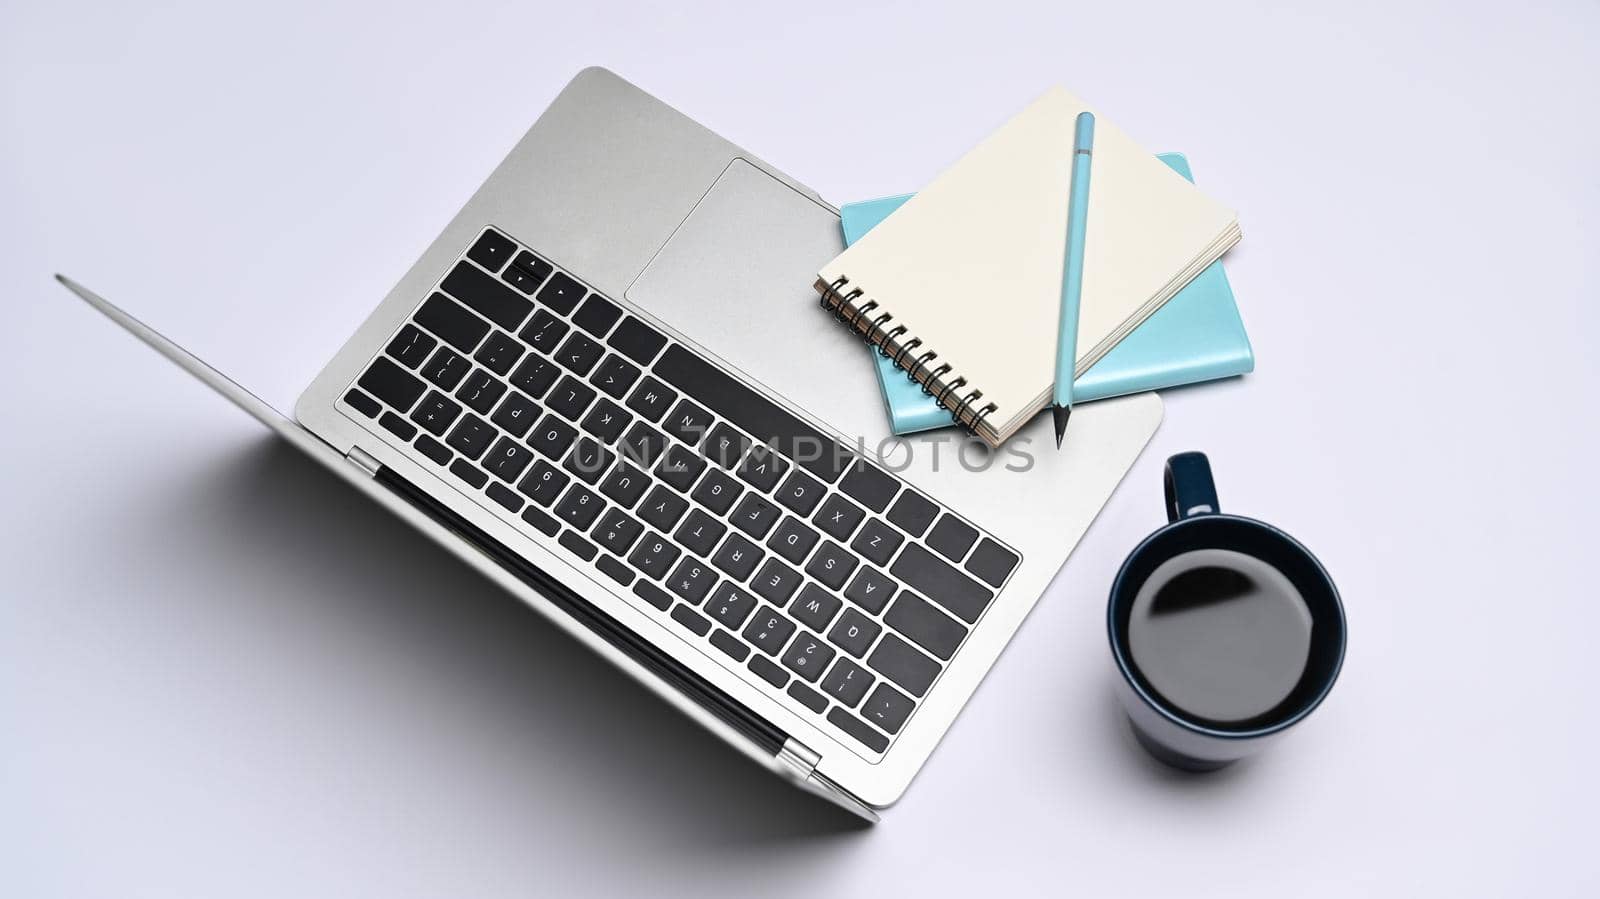 Laptop computer, notebook and coffee cup on white background. Top view. by prathanchorruangsak